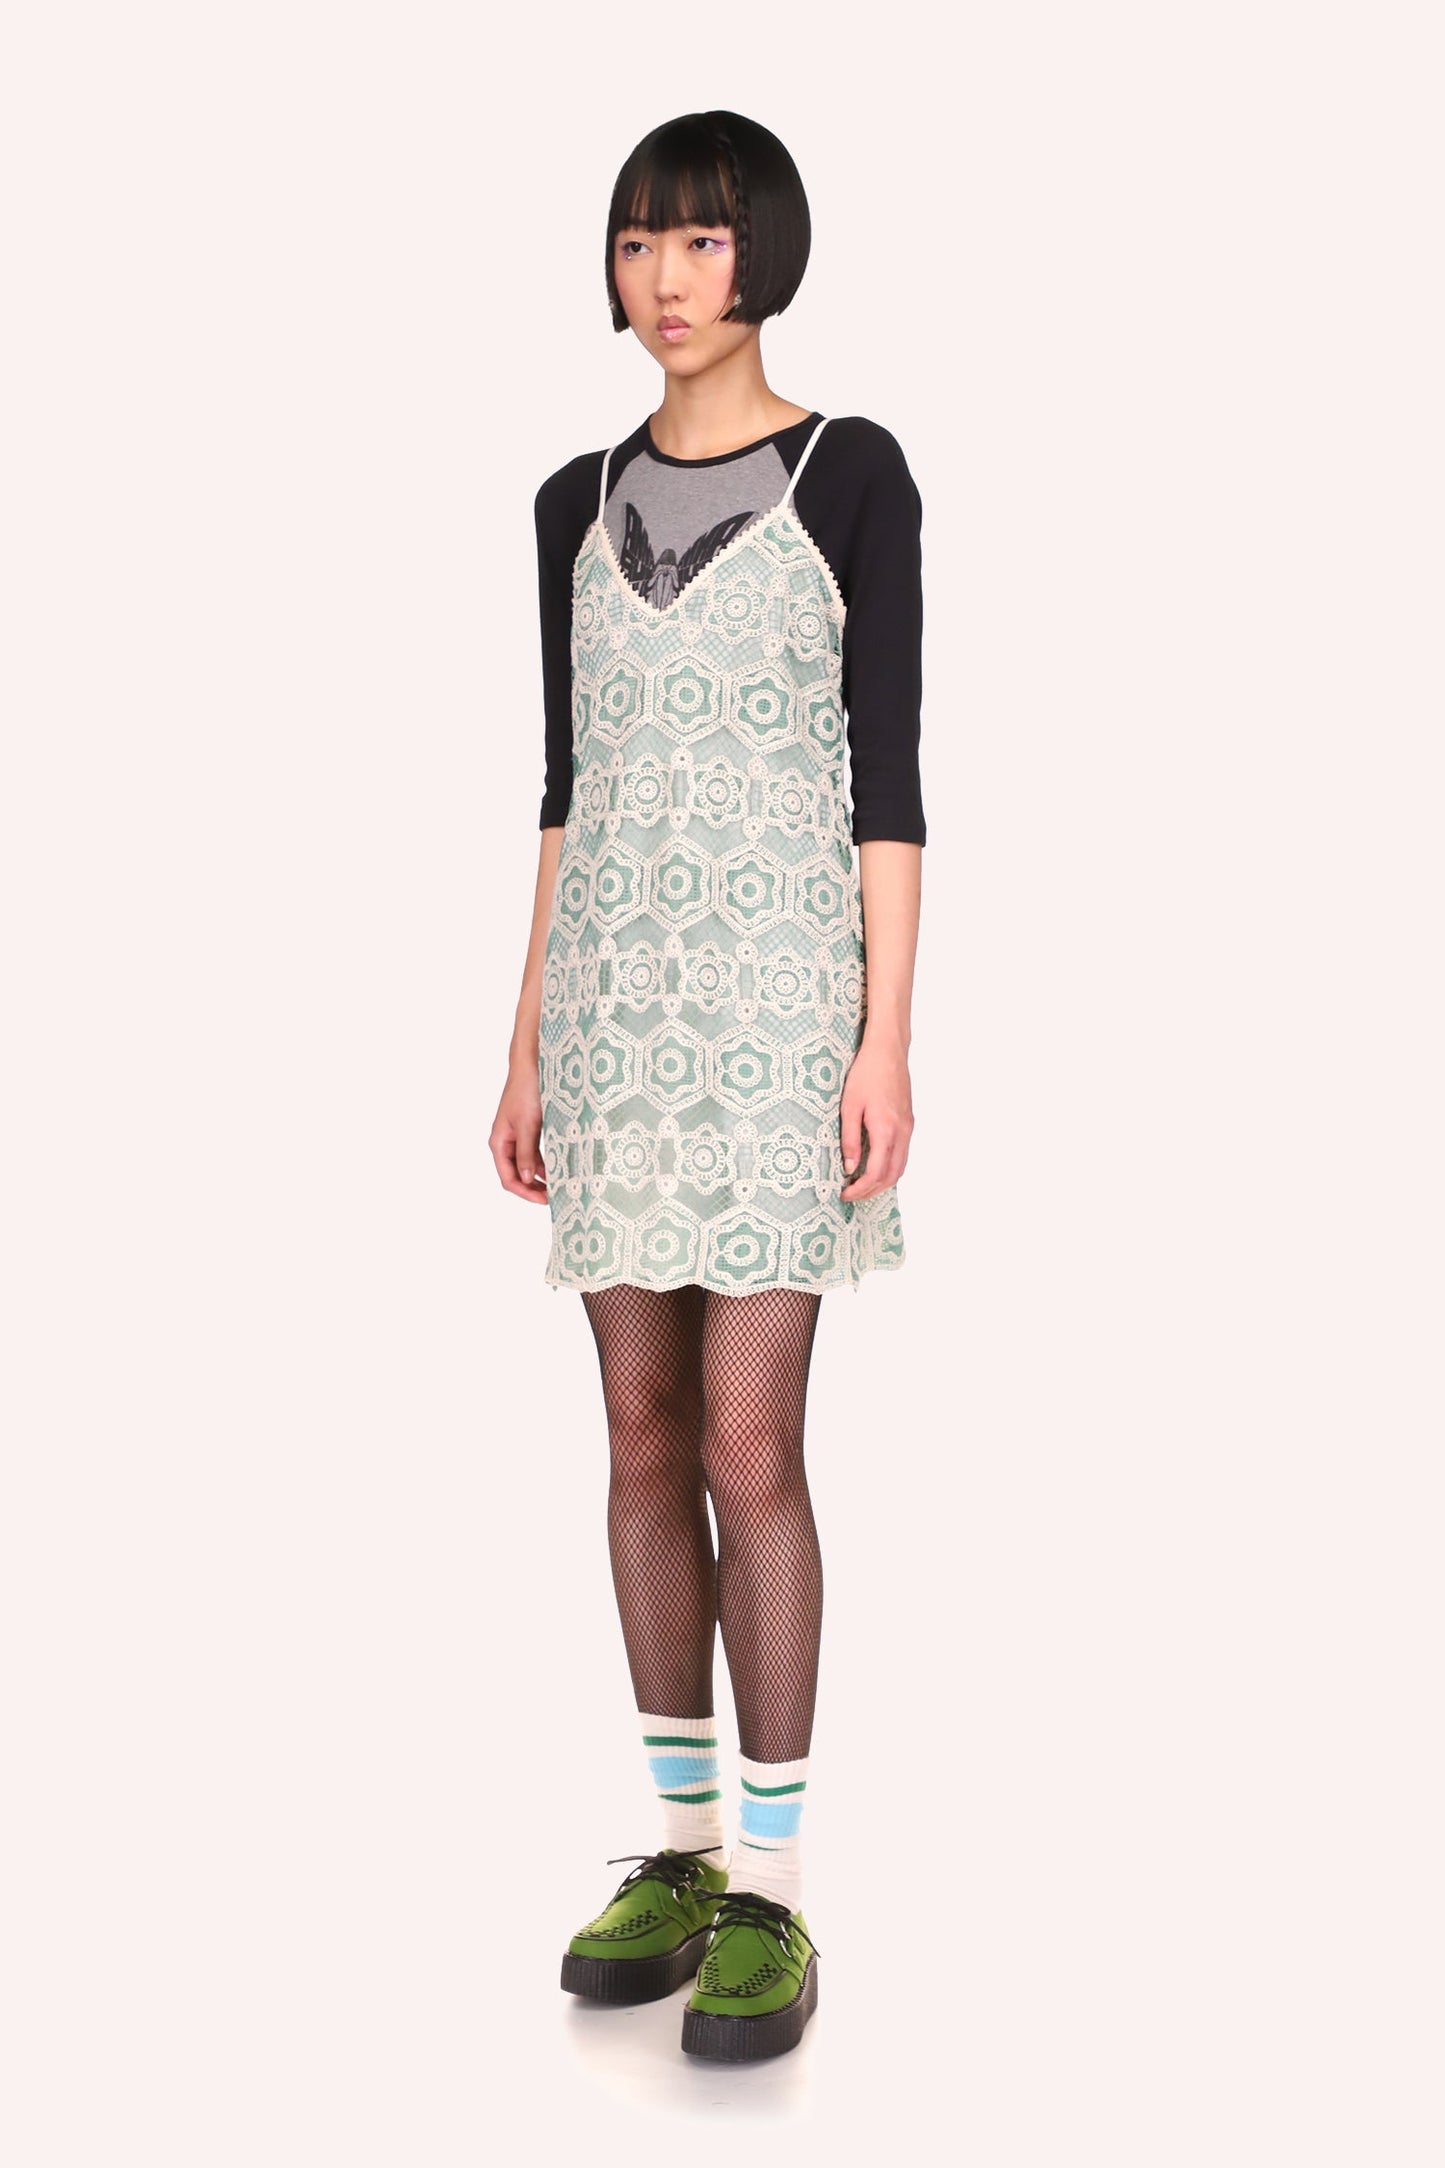 Dress collar V-shaped, lace texture in stylized hexagonal, from light green to darker shades of it